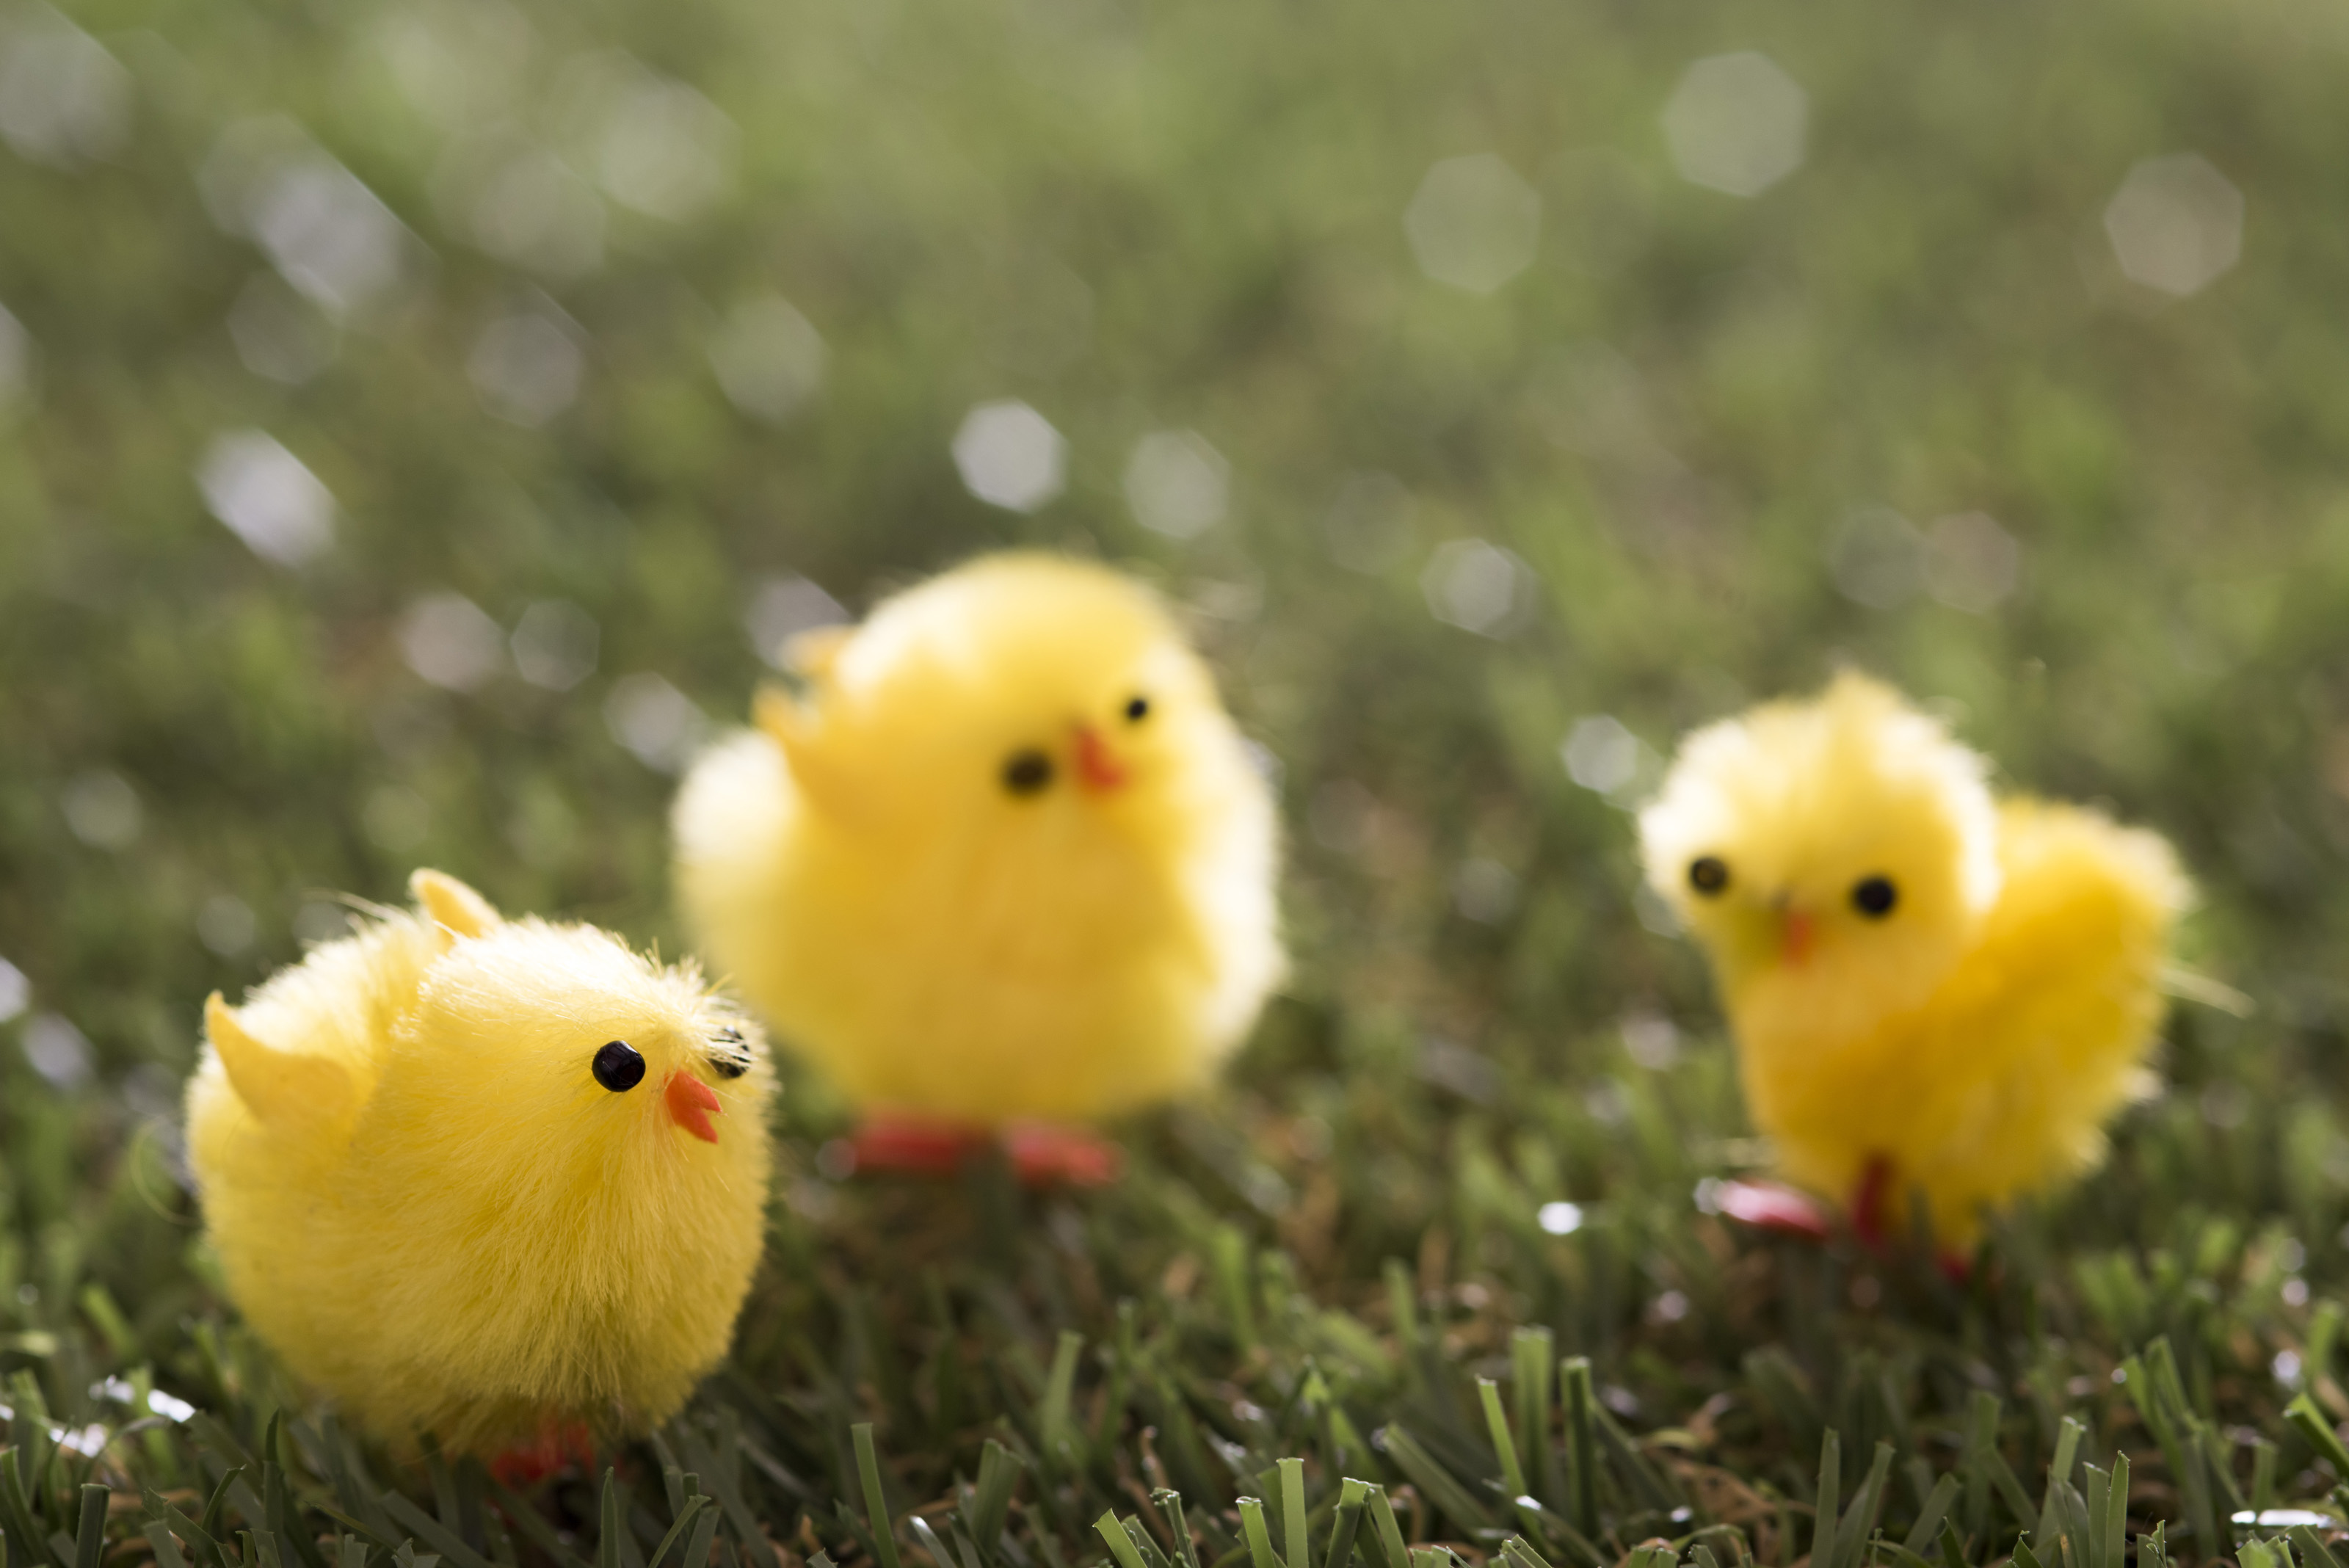 Free Stock Photo 13477 yellow Easter chicks on grass | freeimageslive